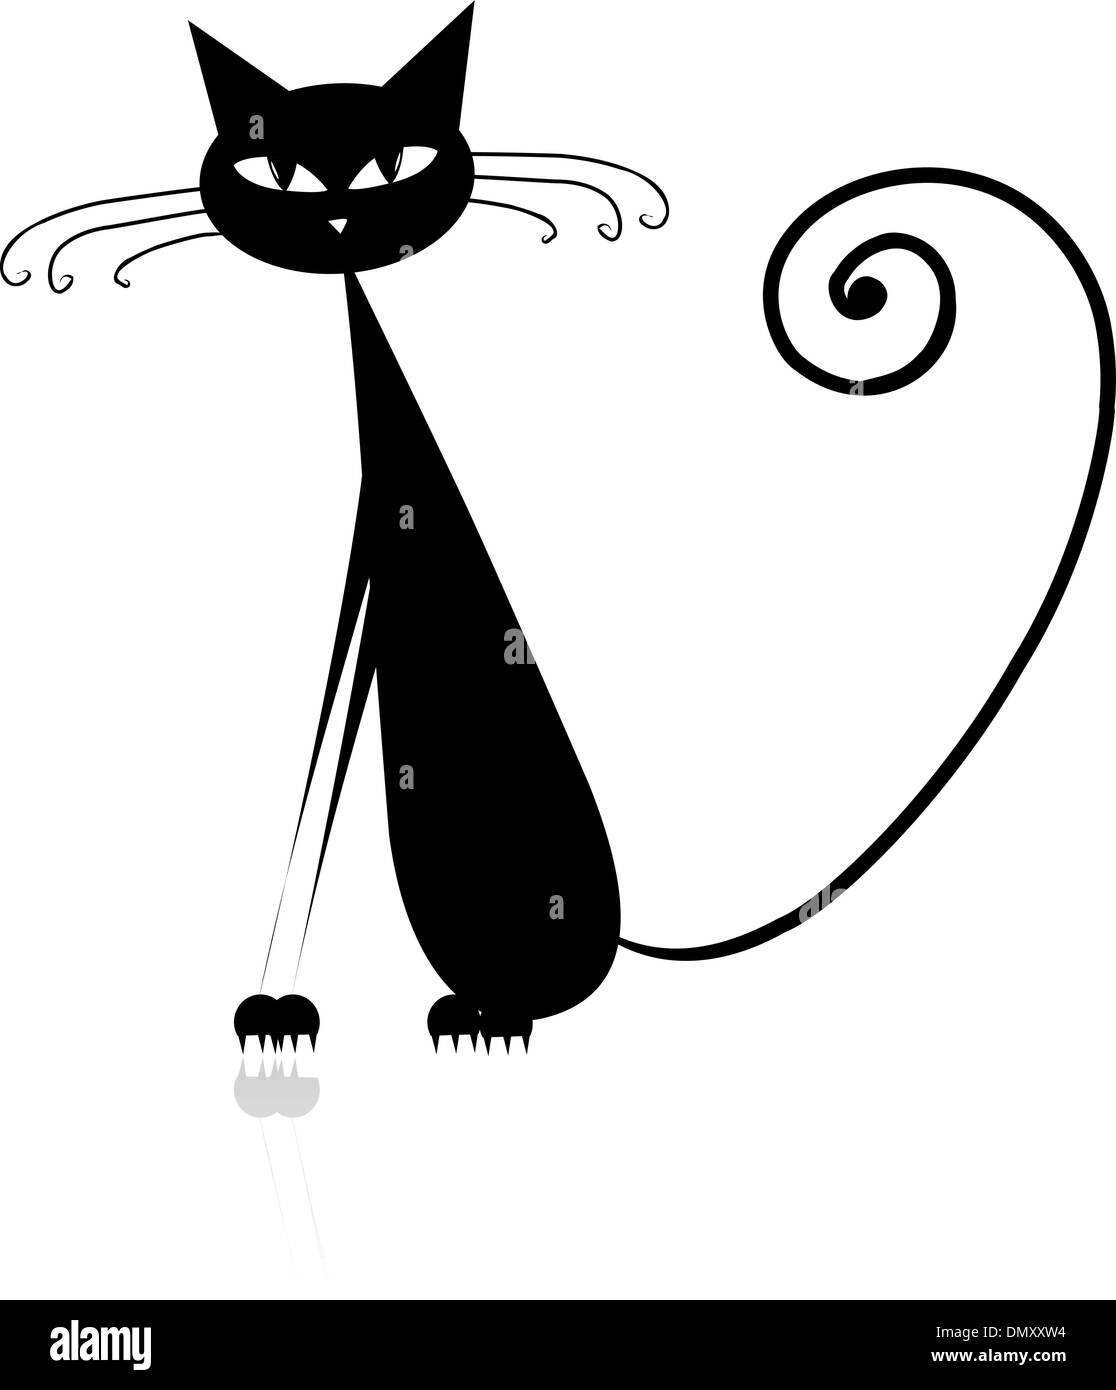 Funny dlack cat silhouette for your design Poster